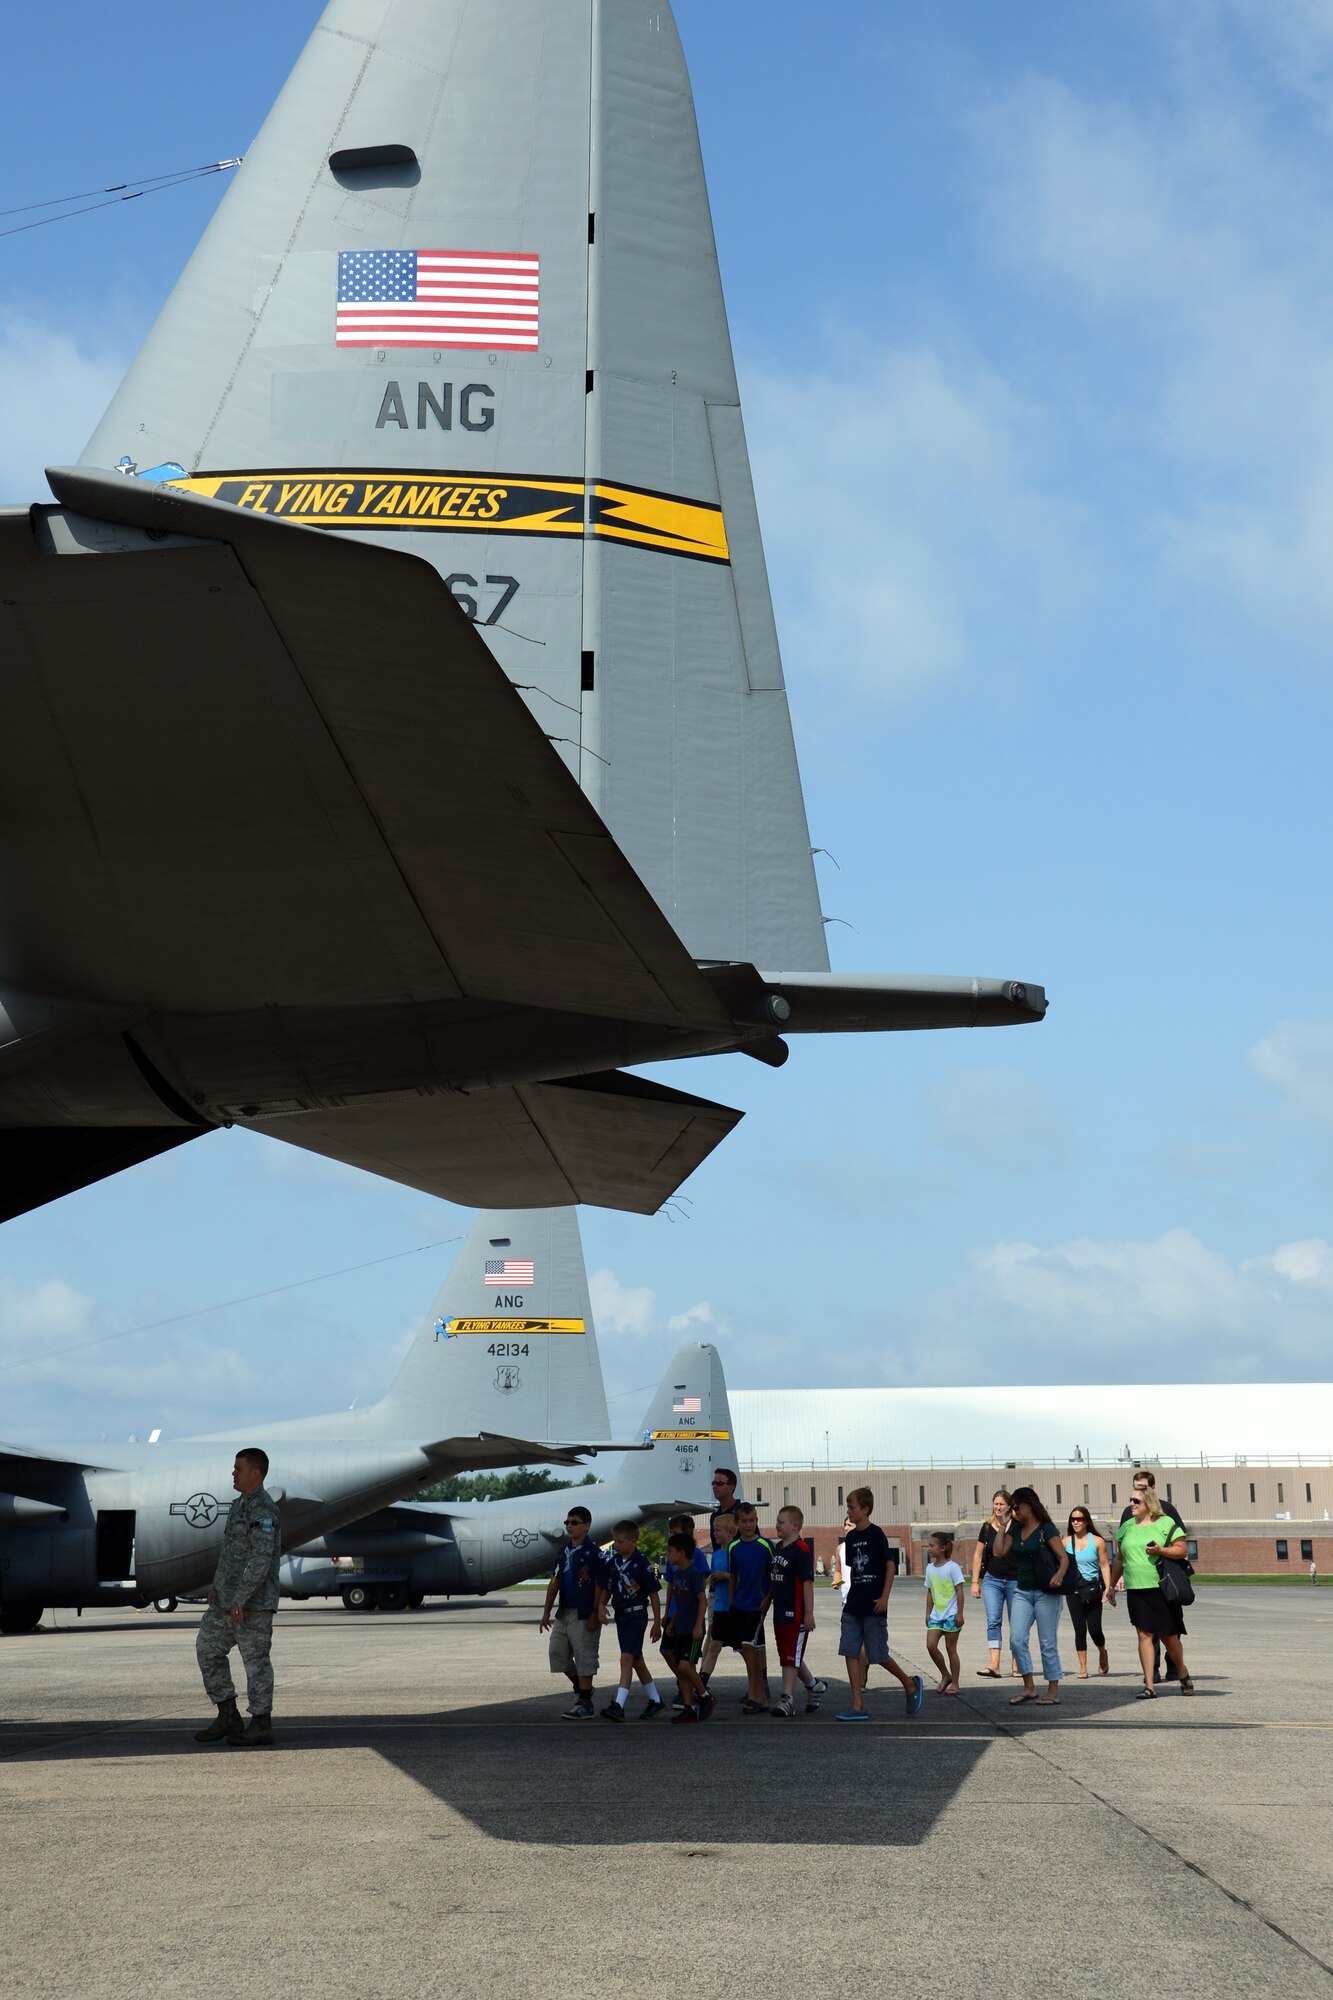 Maj. Bryon Turner, public affairs officer with the 103rd Airlift Wing, leads a group of Cub Scouts out to a C-130H Hercules aircraft on the flightline at Bradley Air National Guard Base, East Granby, Conn., Aug. 4, 2014. The Cub Scouts were able to climb into the cockpit of the aircraft and don some equipment used by the loadmasters. (U.S. Air National Guard photo by Tech. Sgt. Joshua Mead/Released)